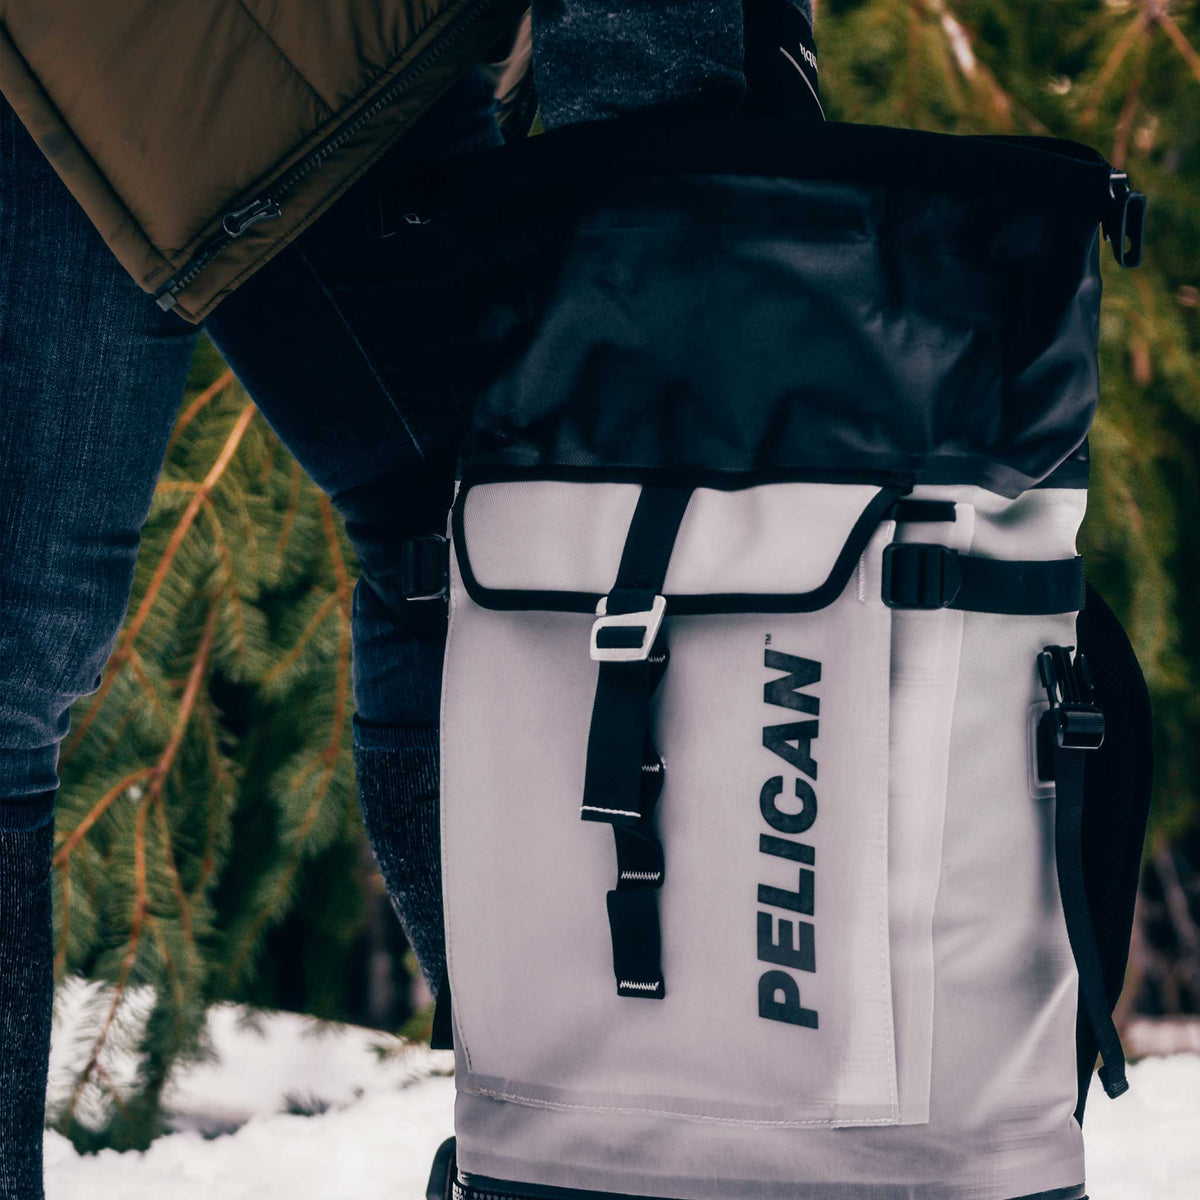 Pelican™ Dayventure Backpack Soft Cooler reaching inside the dry storage compartment outside in the snow